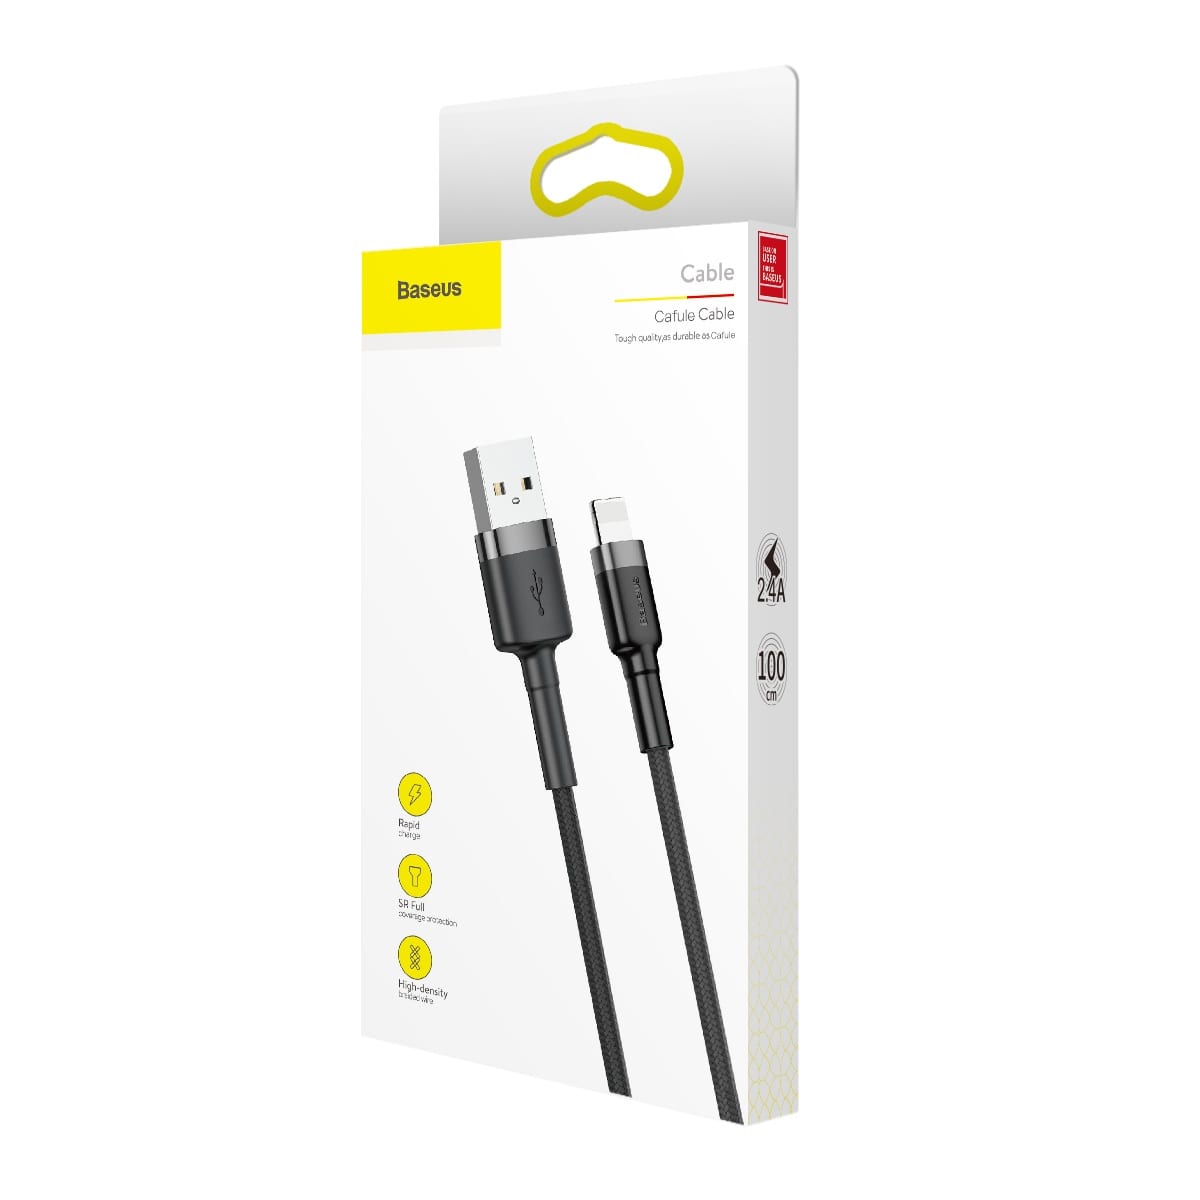 Baseus cafule Lightning Cable 1M Accessories 7673 1 5